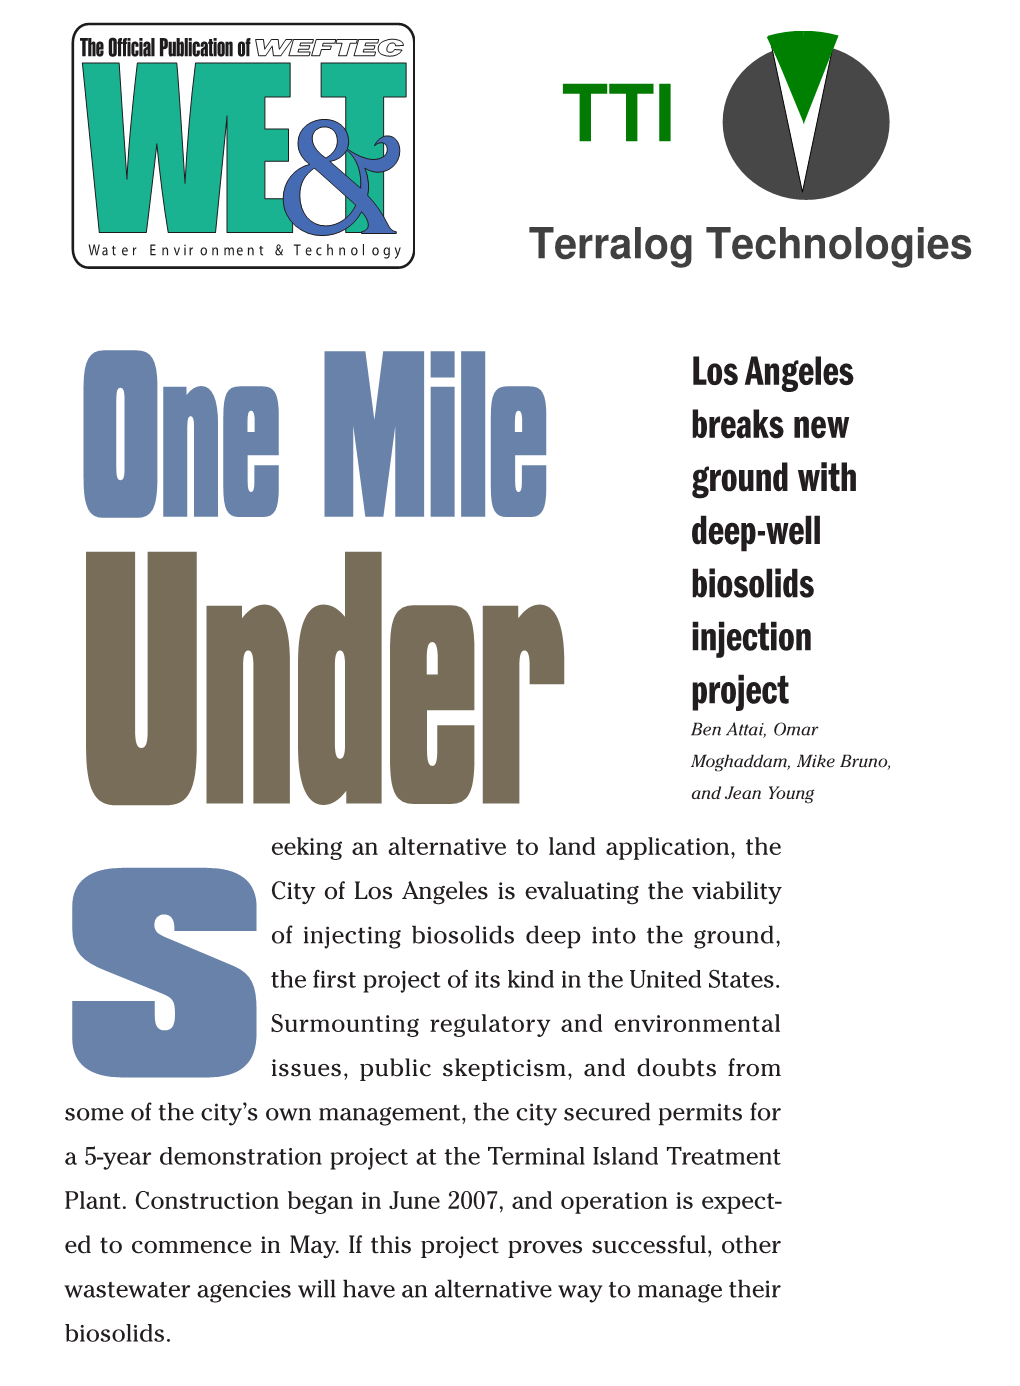 Los Angeles Breaks New Ground with Deep-Well Biosolids Injection Project